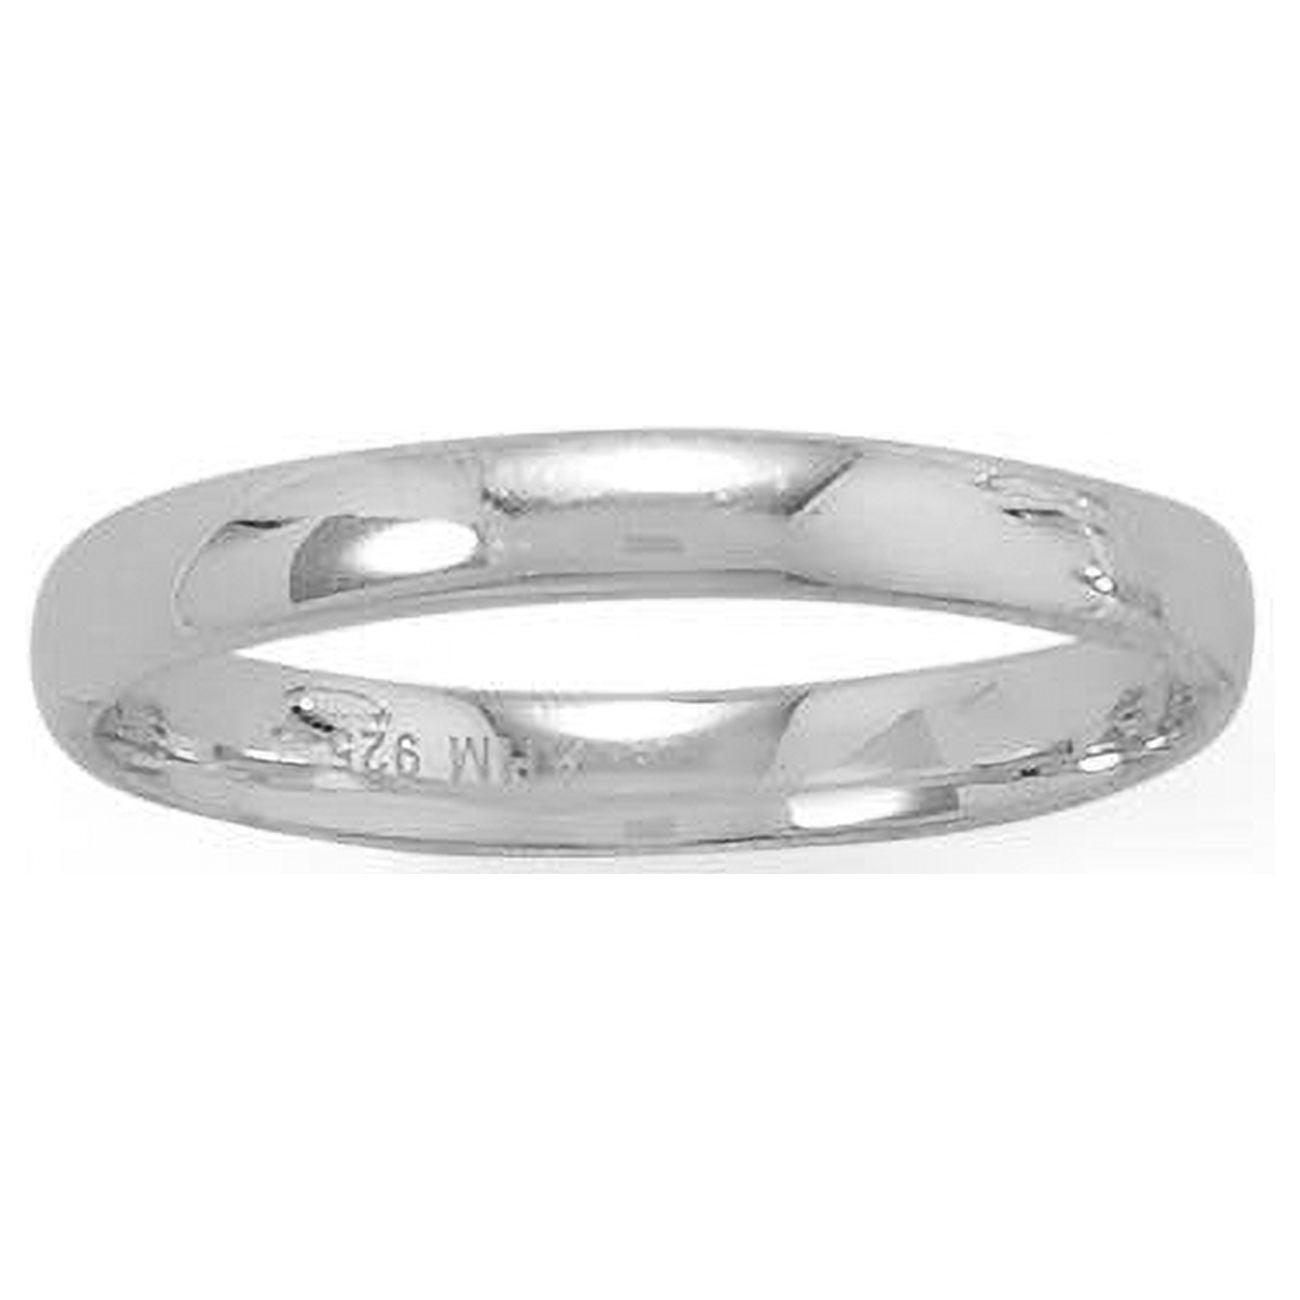 Picture of Precious Stars 83813-10 Sterling Silver Polished 3 mm Wedding Band Ring - Size 10